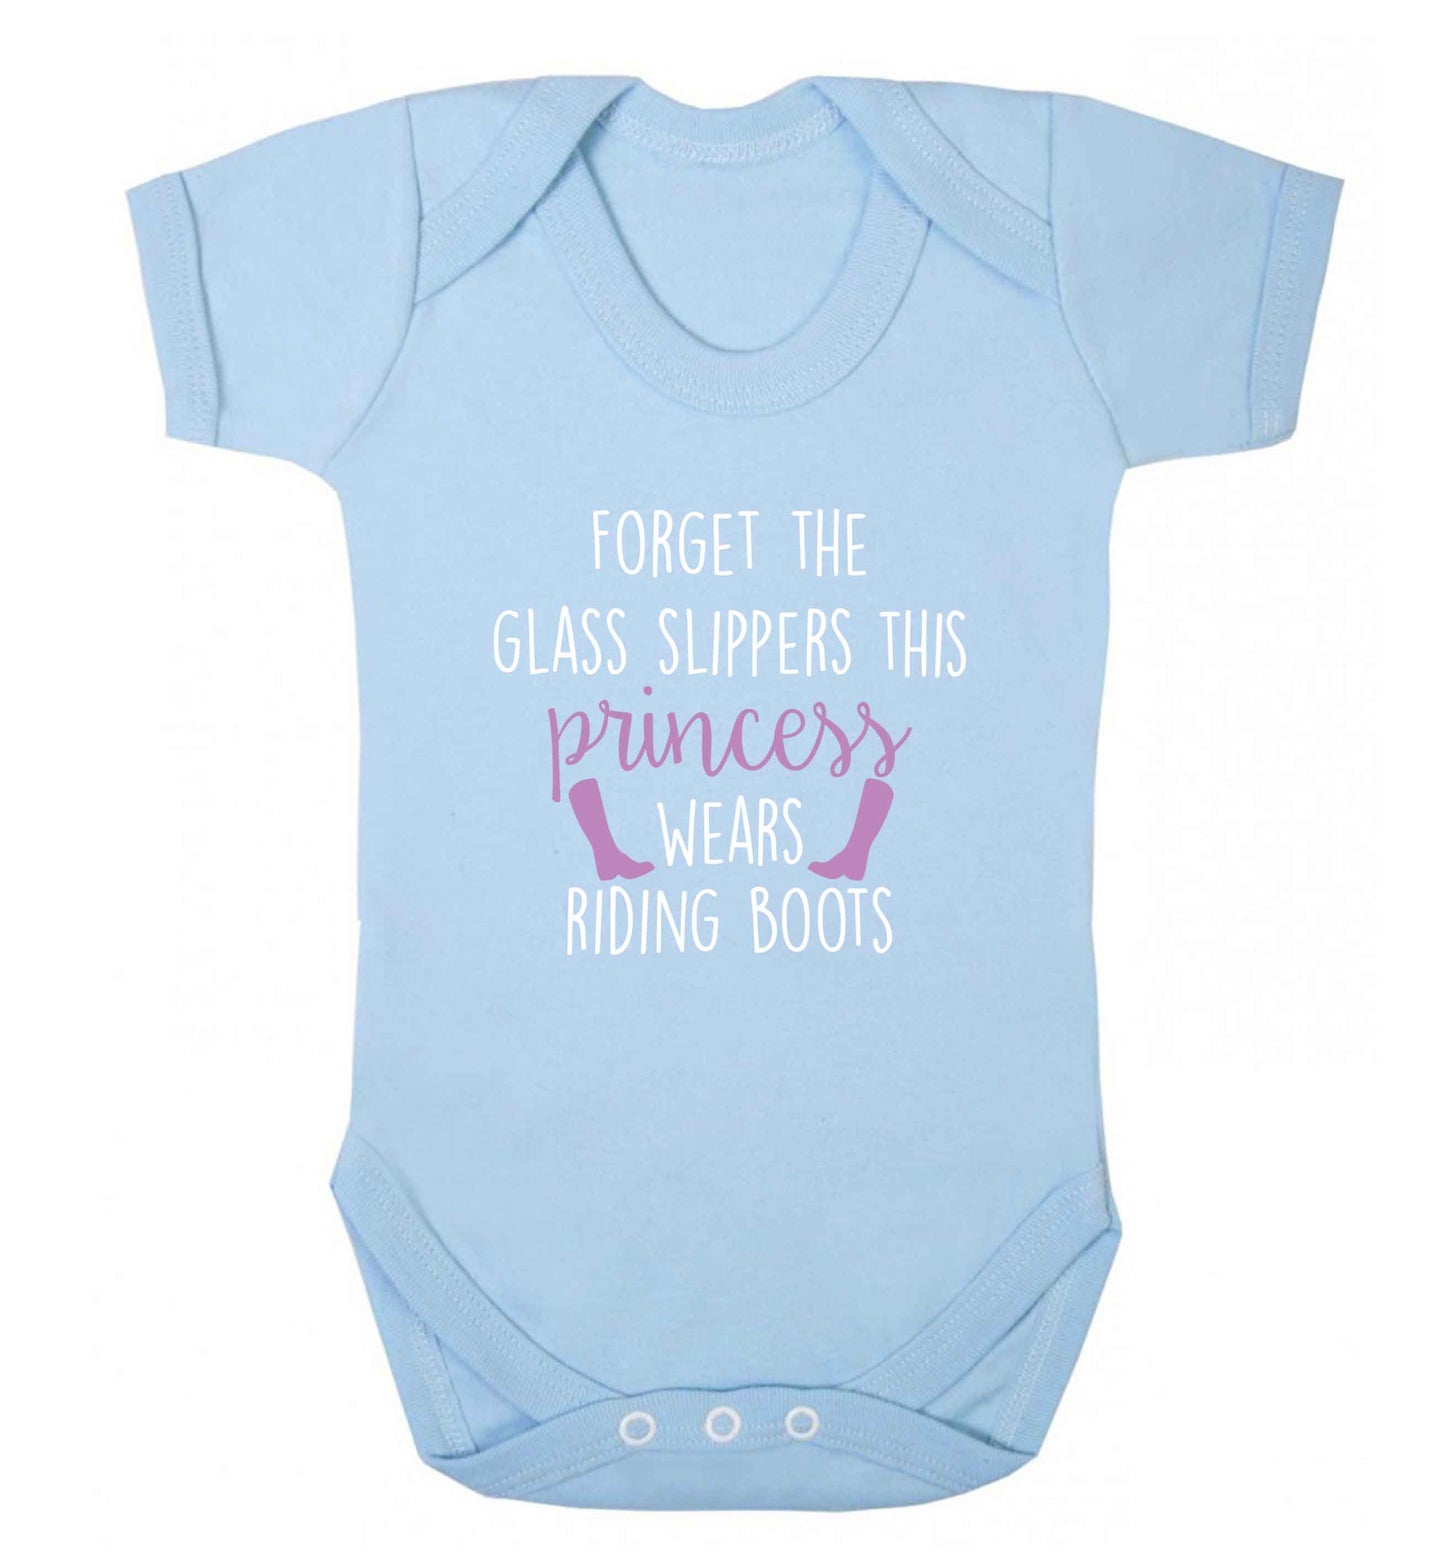 Forget the glass slippers this princess wears riding boots baby vest pale blue 18-24 months